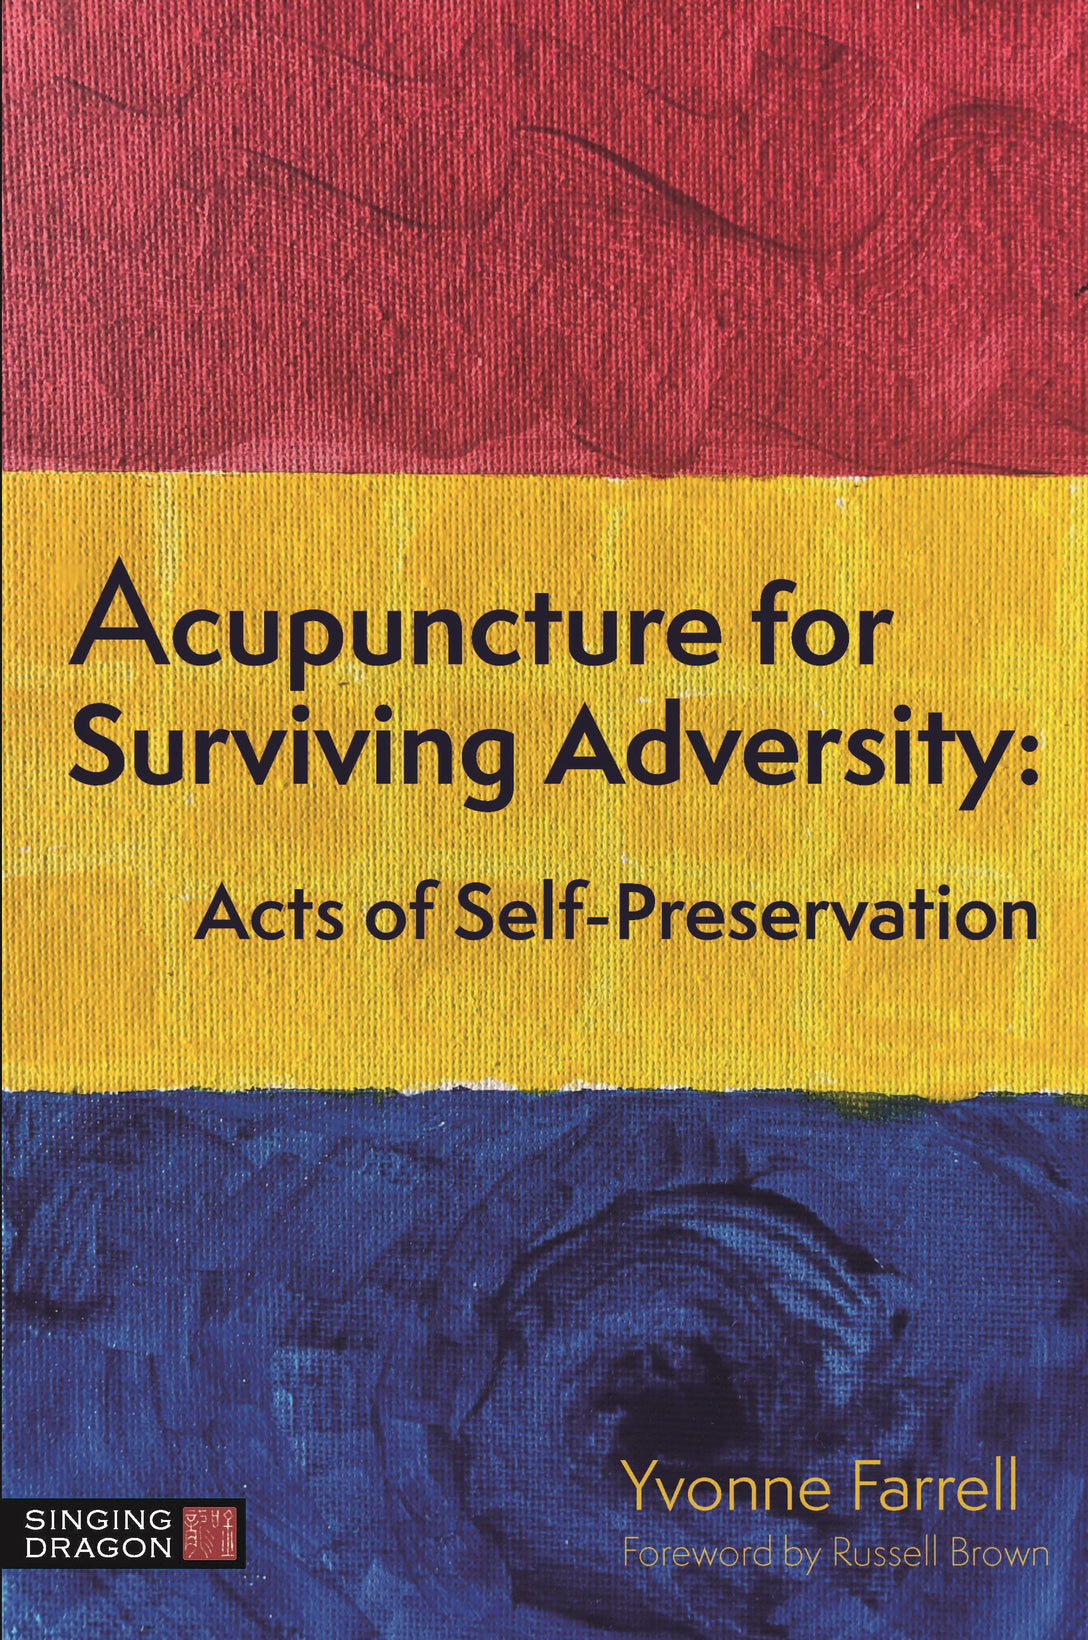 Acupuncture for Surviving Adversity by Russell Brown, L.Ac., Yvonne R. Farrell